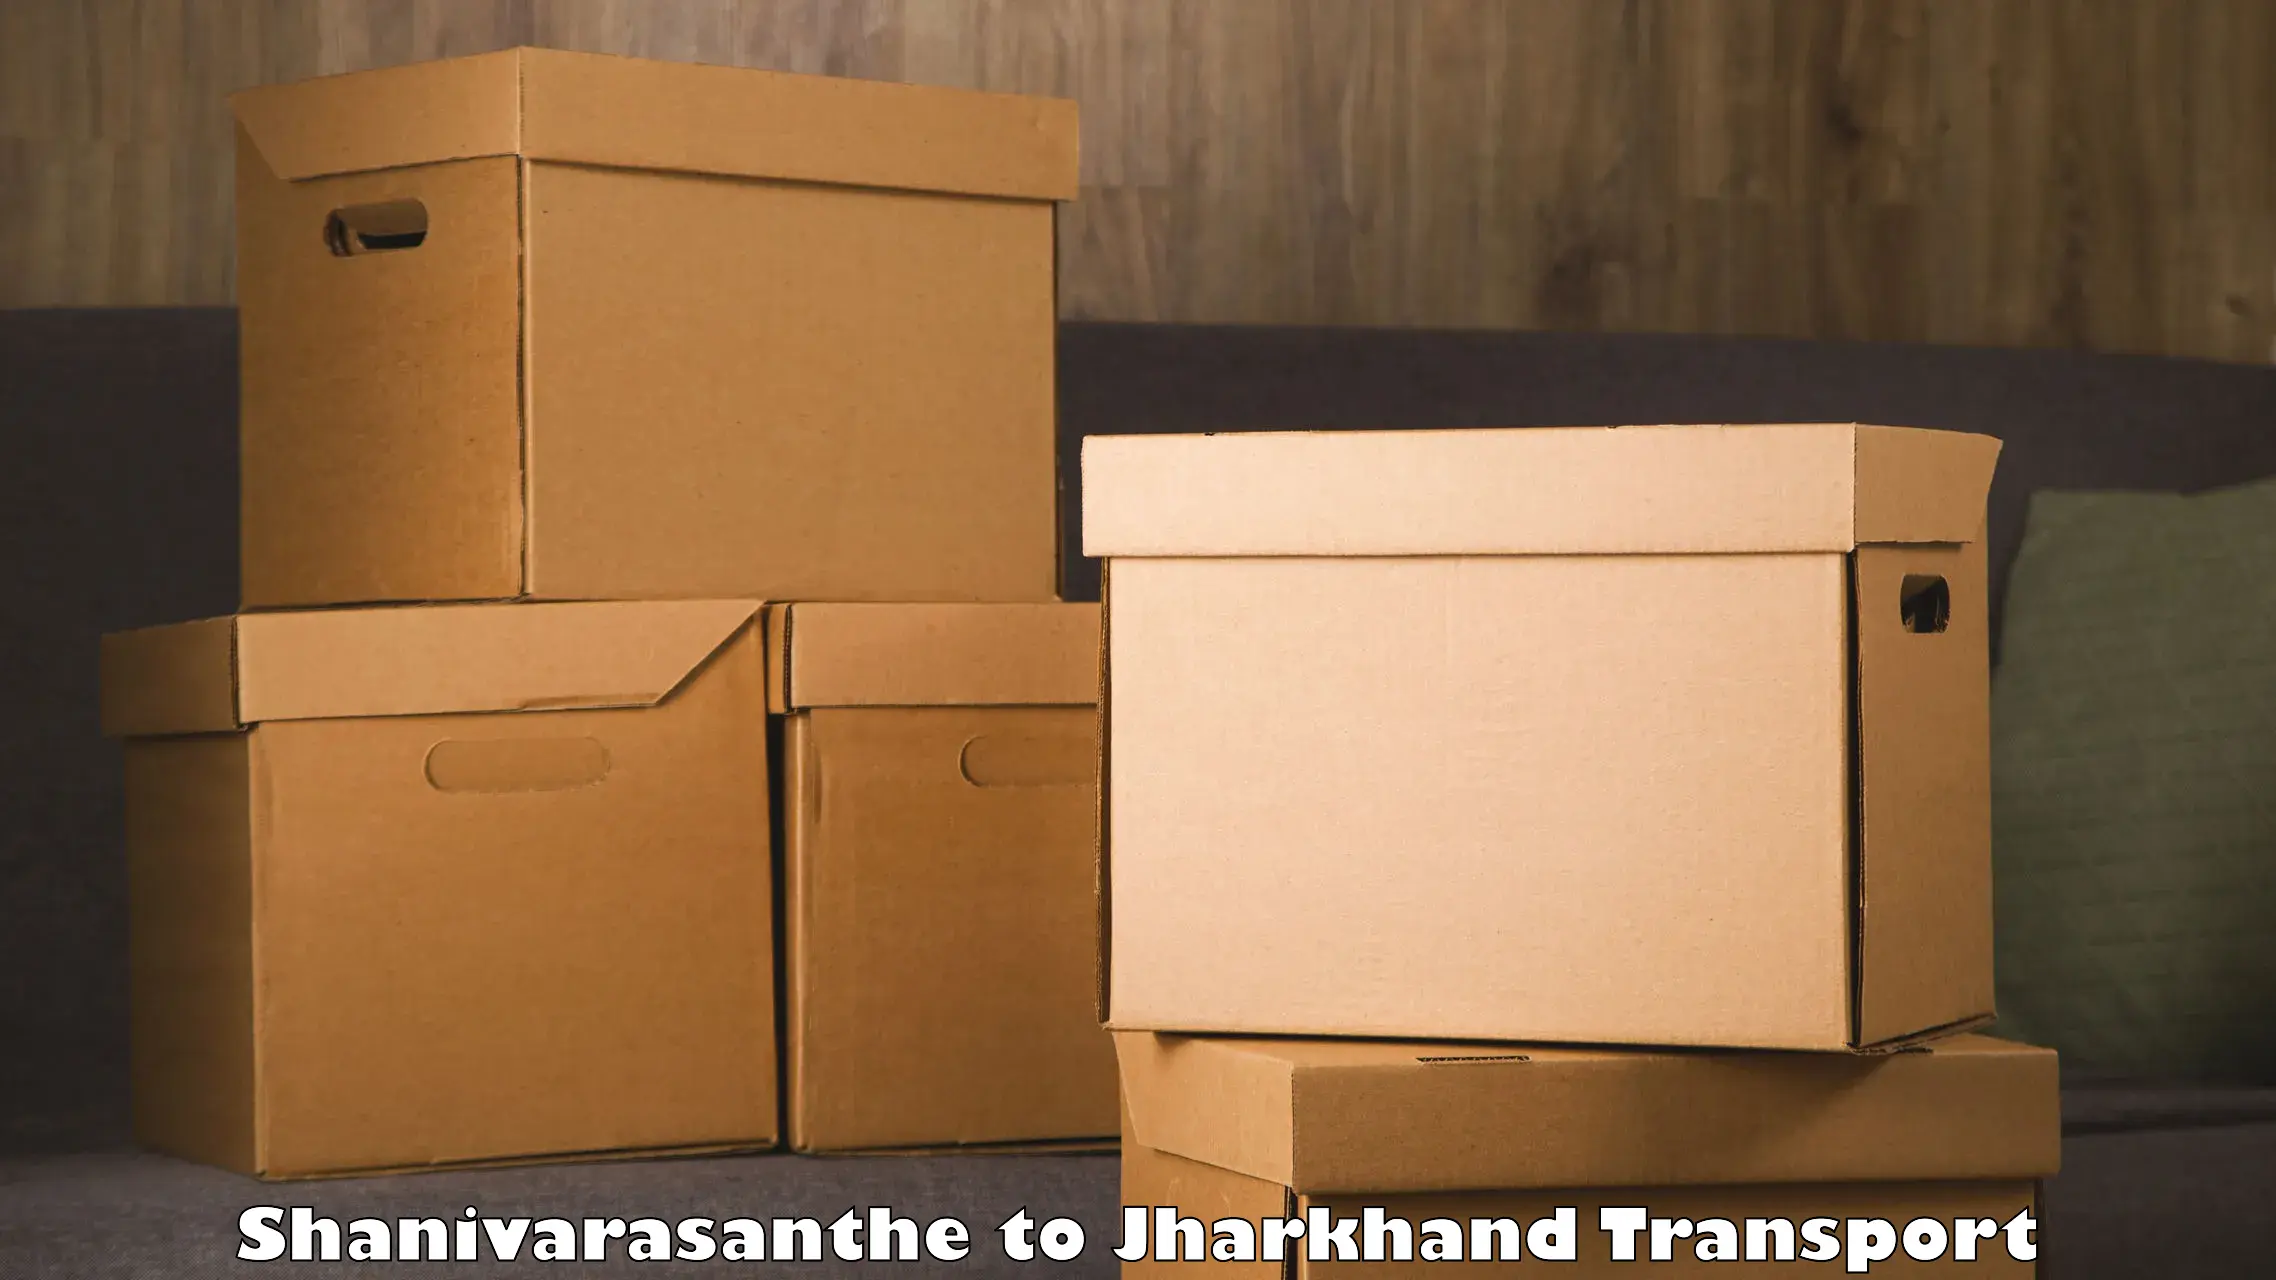 Delivery service Shanivarasanthe to IIT Dhanbad